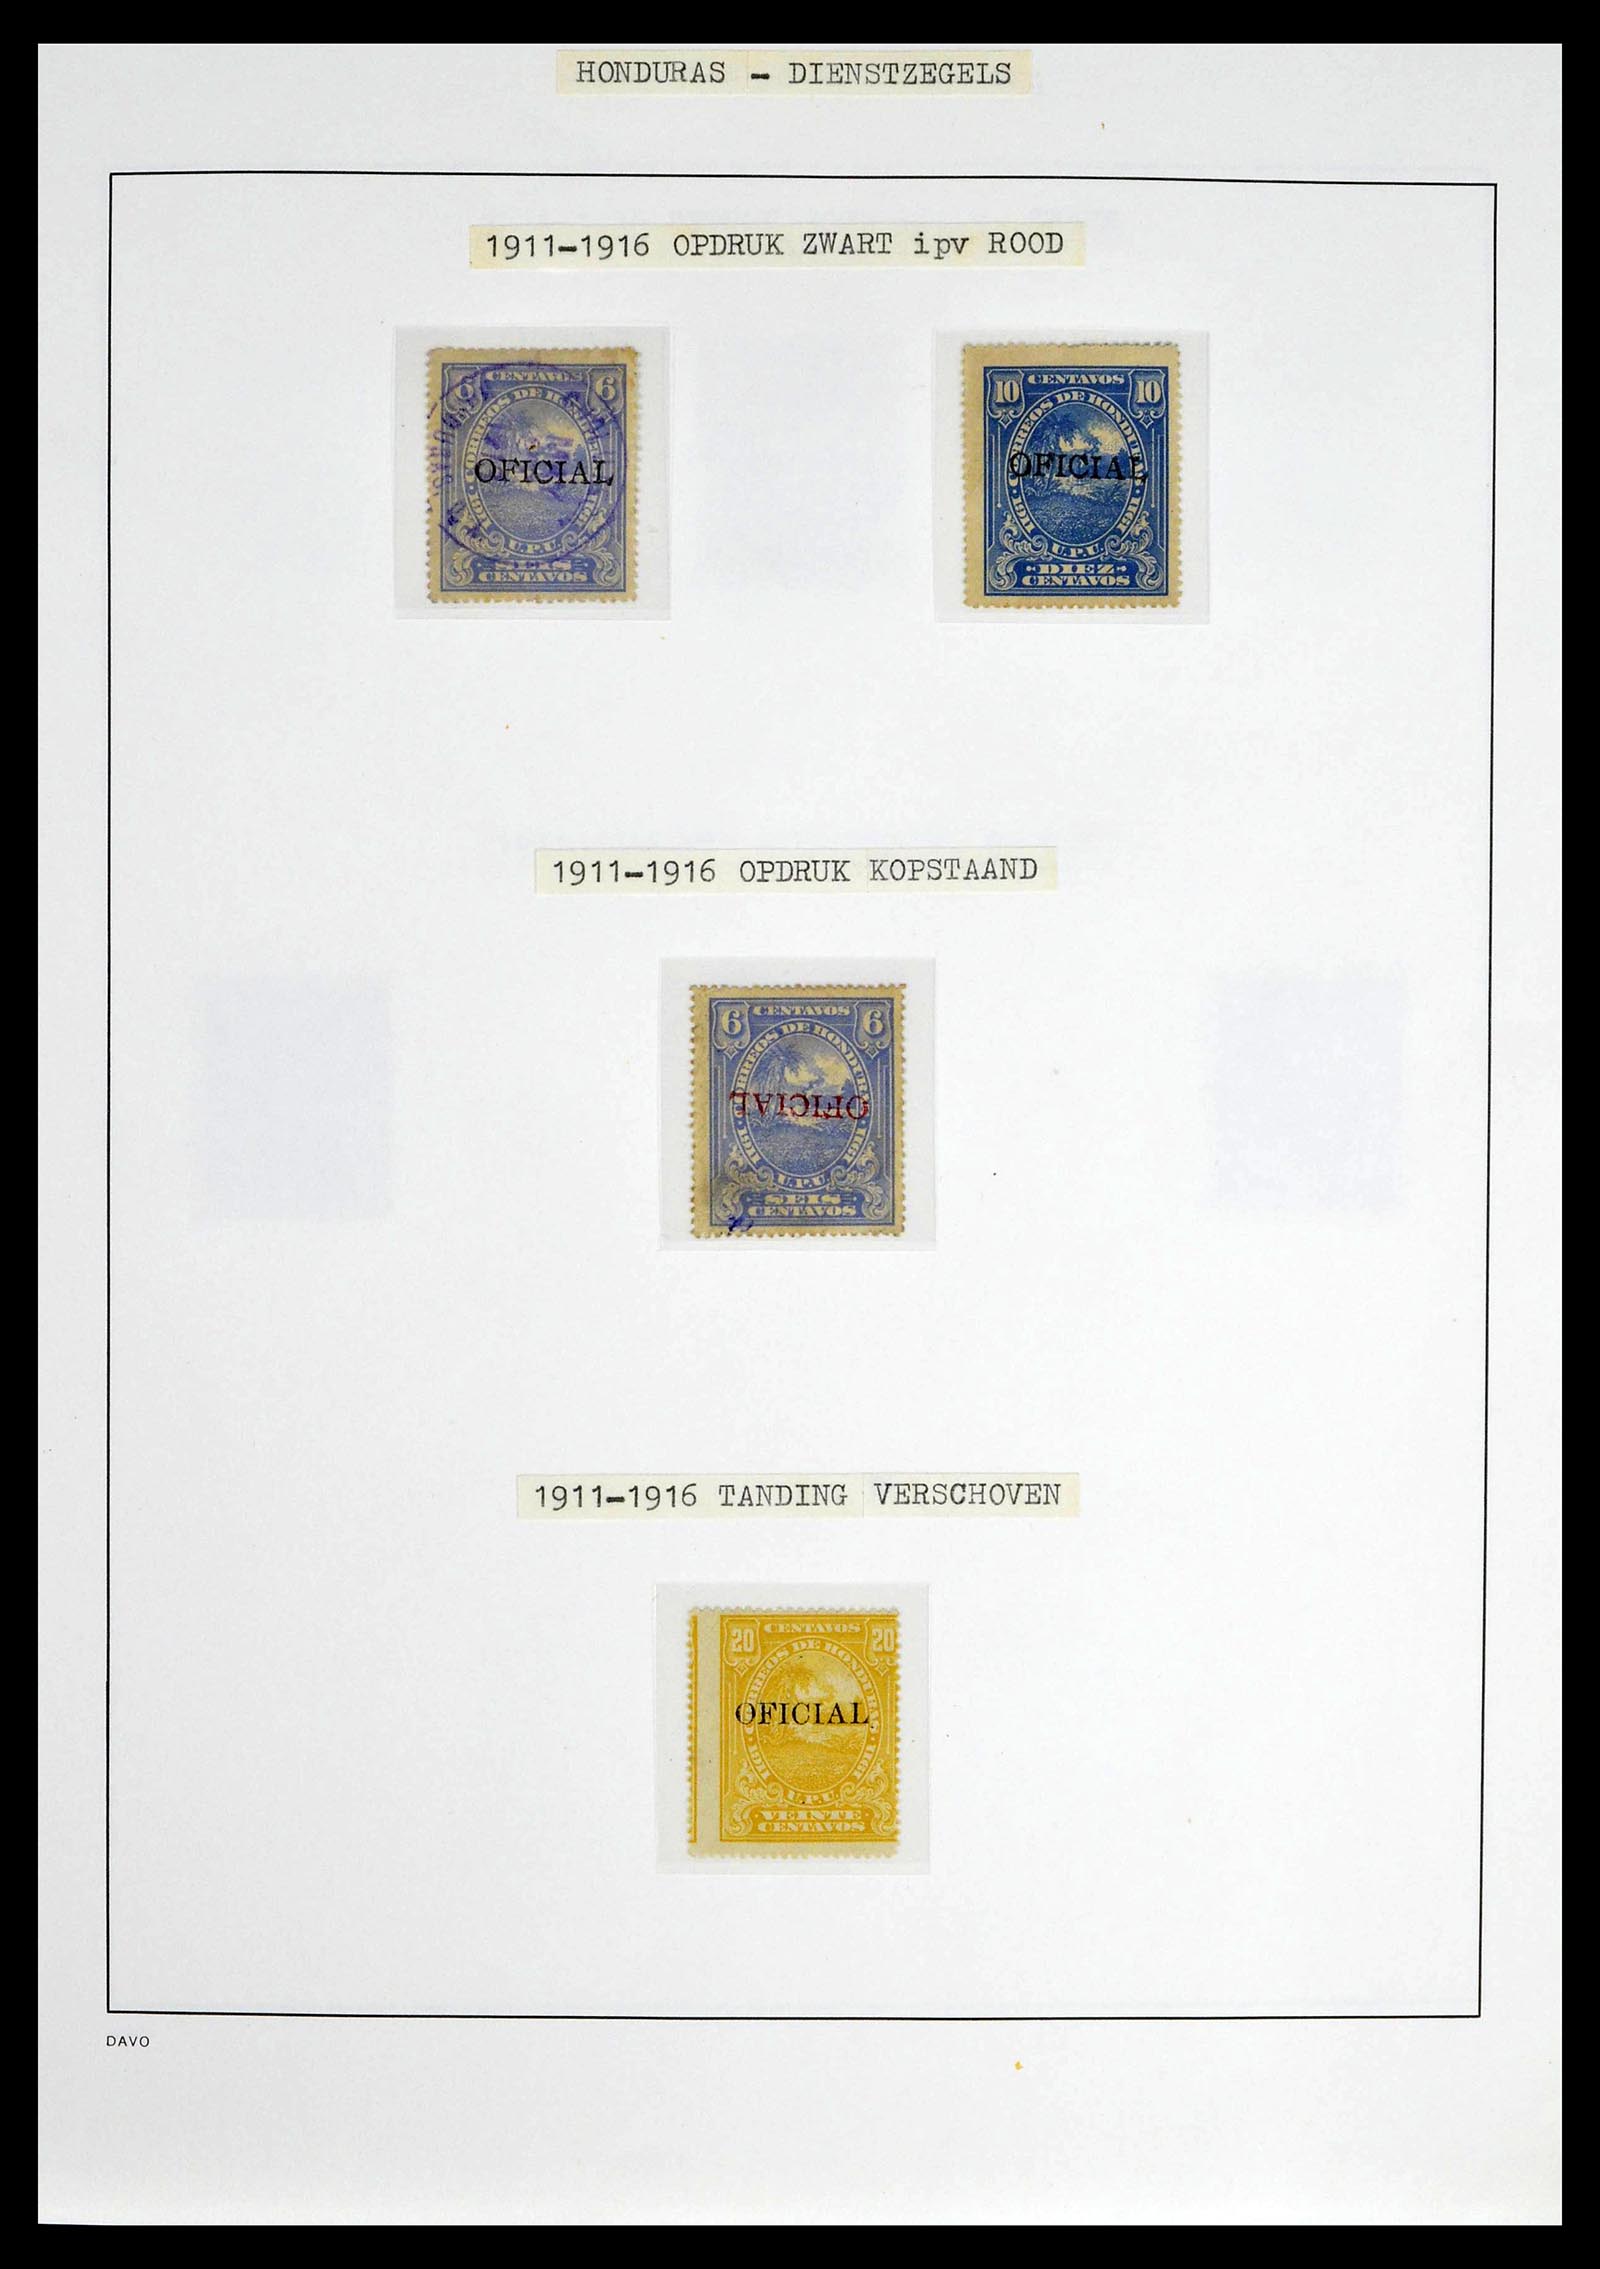 39404 0008 - Stamp collection 39404 Honduras service stamps 1890-1974.